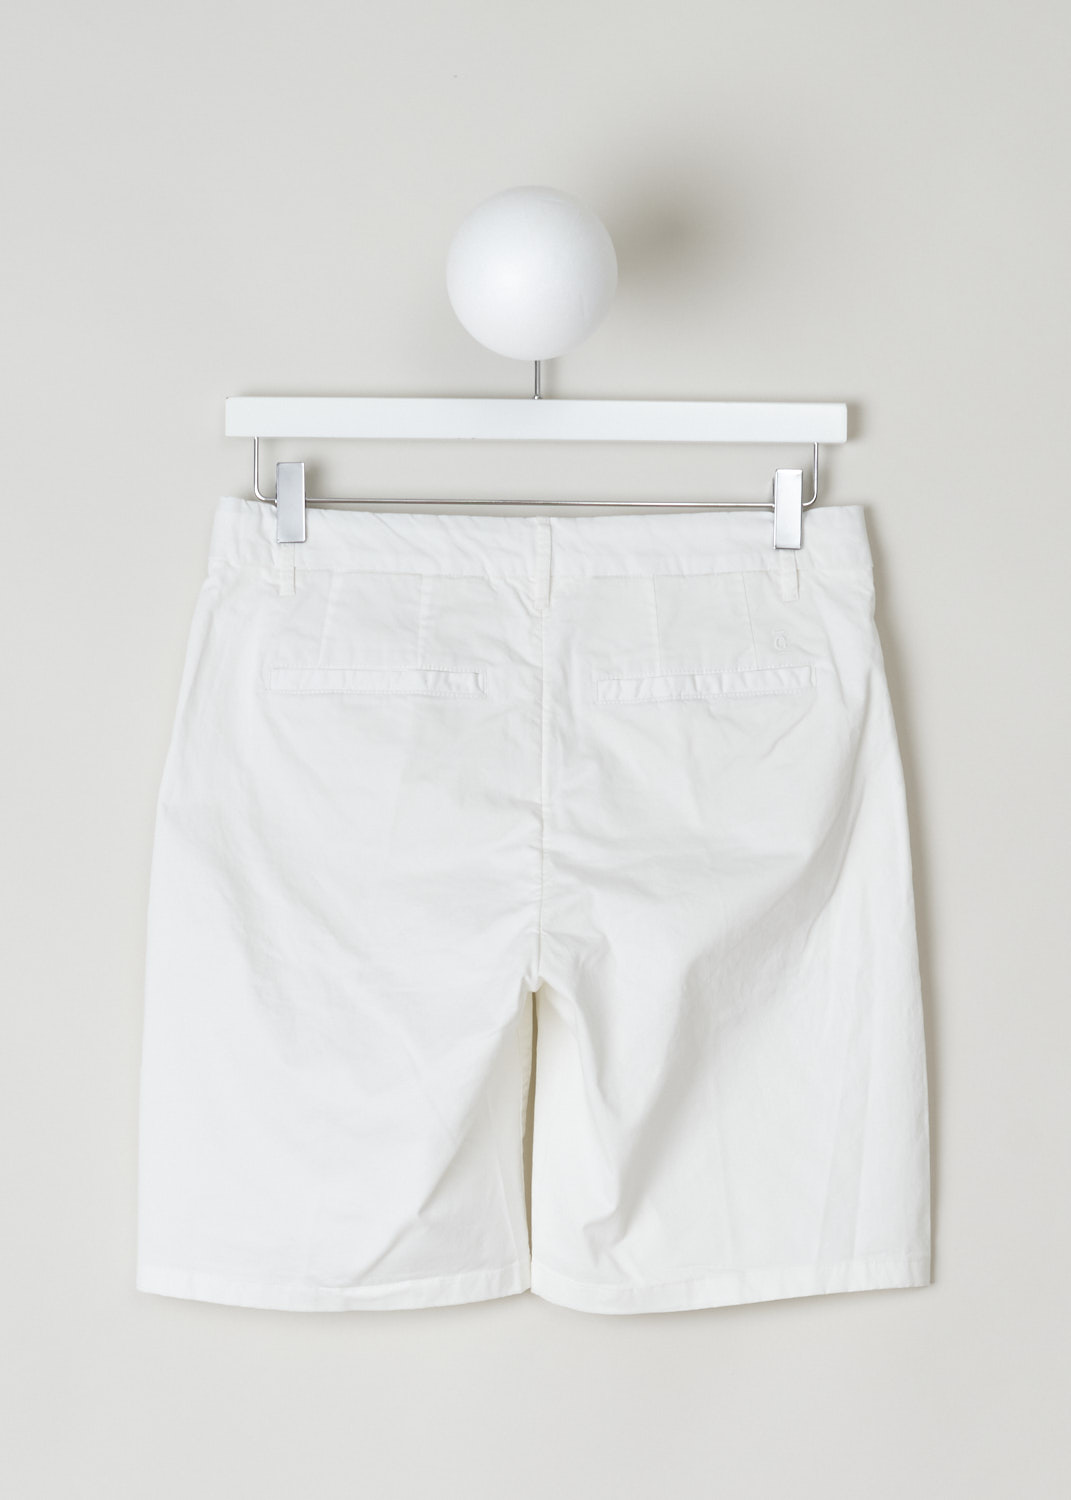 Closed, White shorts, holden_C92244_30D_20_218, white, back, Brighten up your wardrobe with these white shorts. Made in the chino model, so it has forward slanted pockets on the front and two jetted pockets on the back. The closure option here comes in the form of zipper and a regular button.  